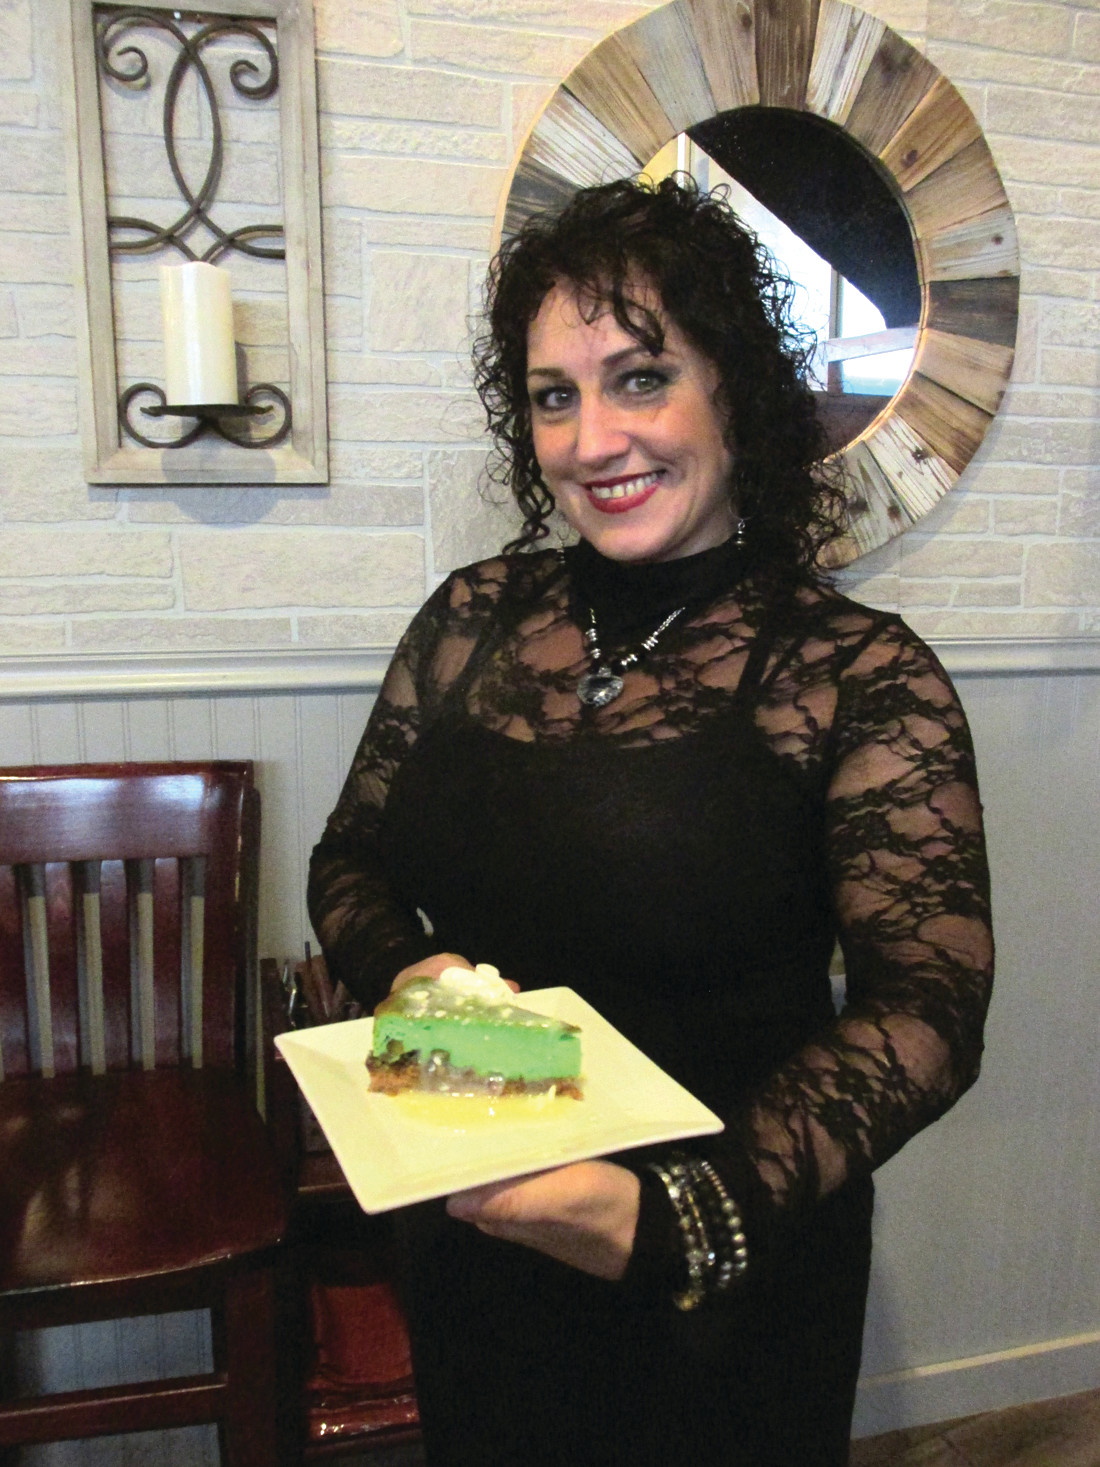 CLEVER CREATION: Susie Marshall, a super staffer at The Ave Restaurant Bar & Grill, holds a serving of Pistachio Cheesecake, one of Chef-Owner Jennifer Lombardo’s creations.